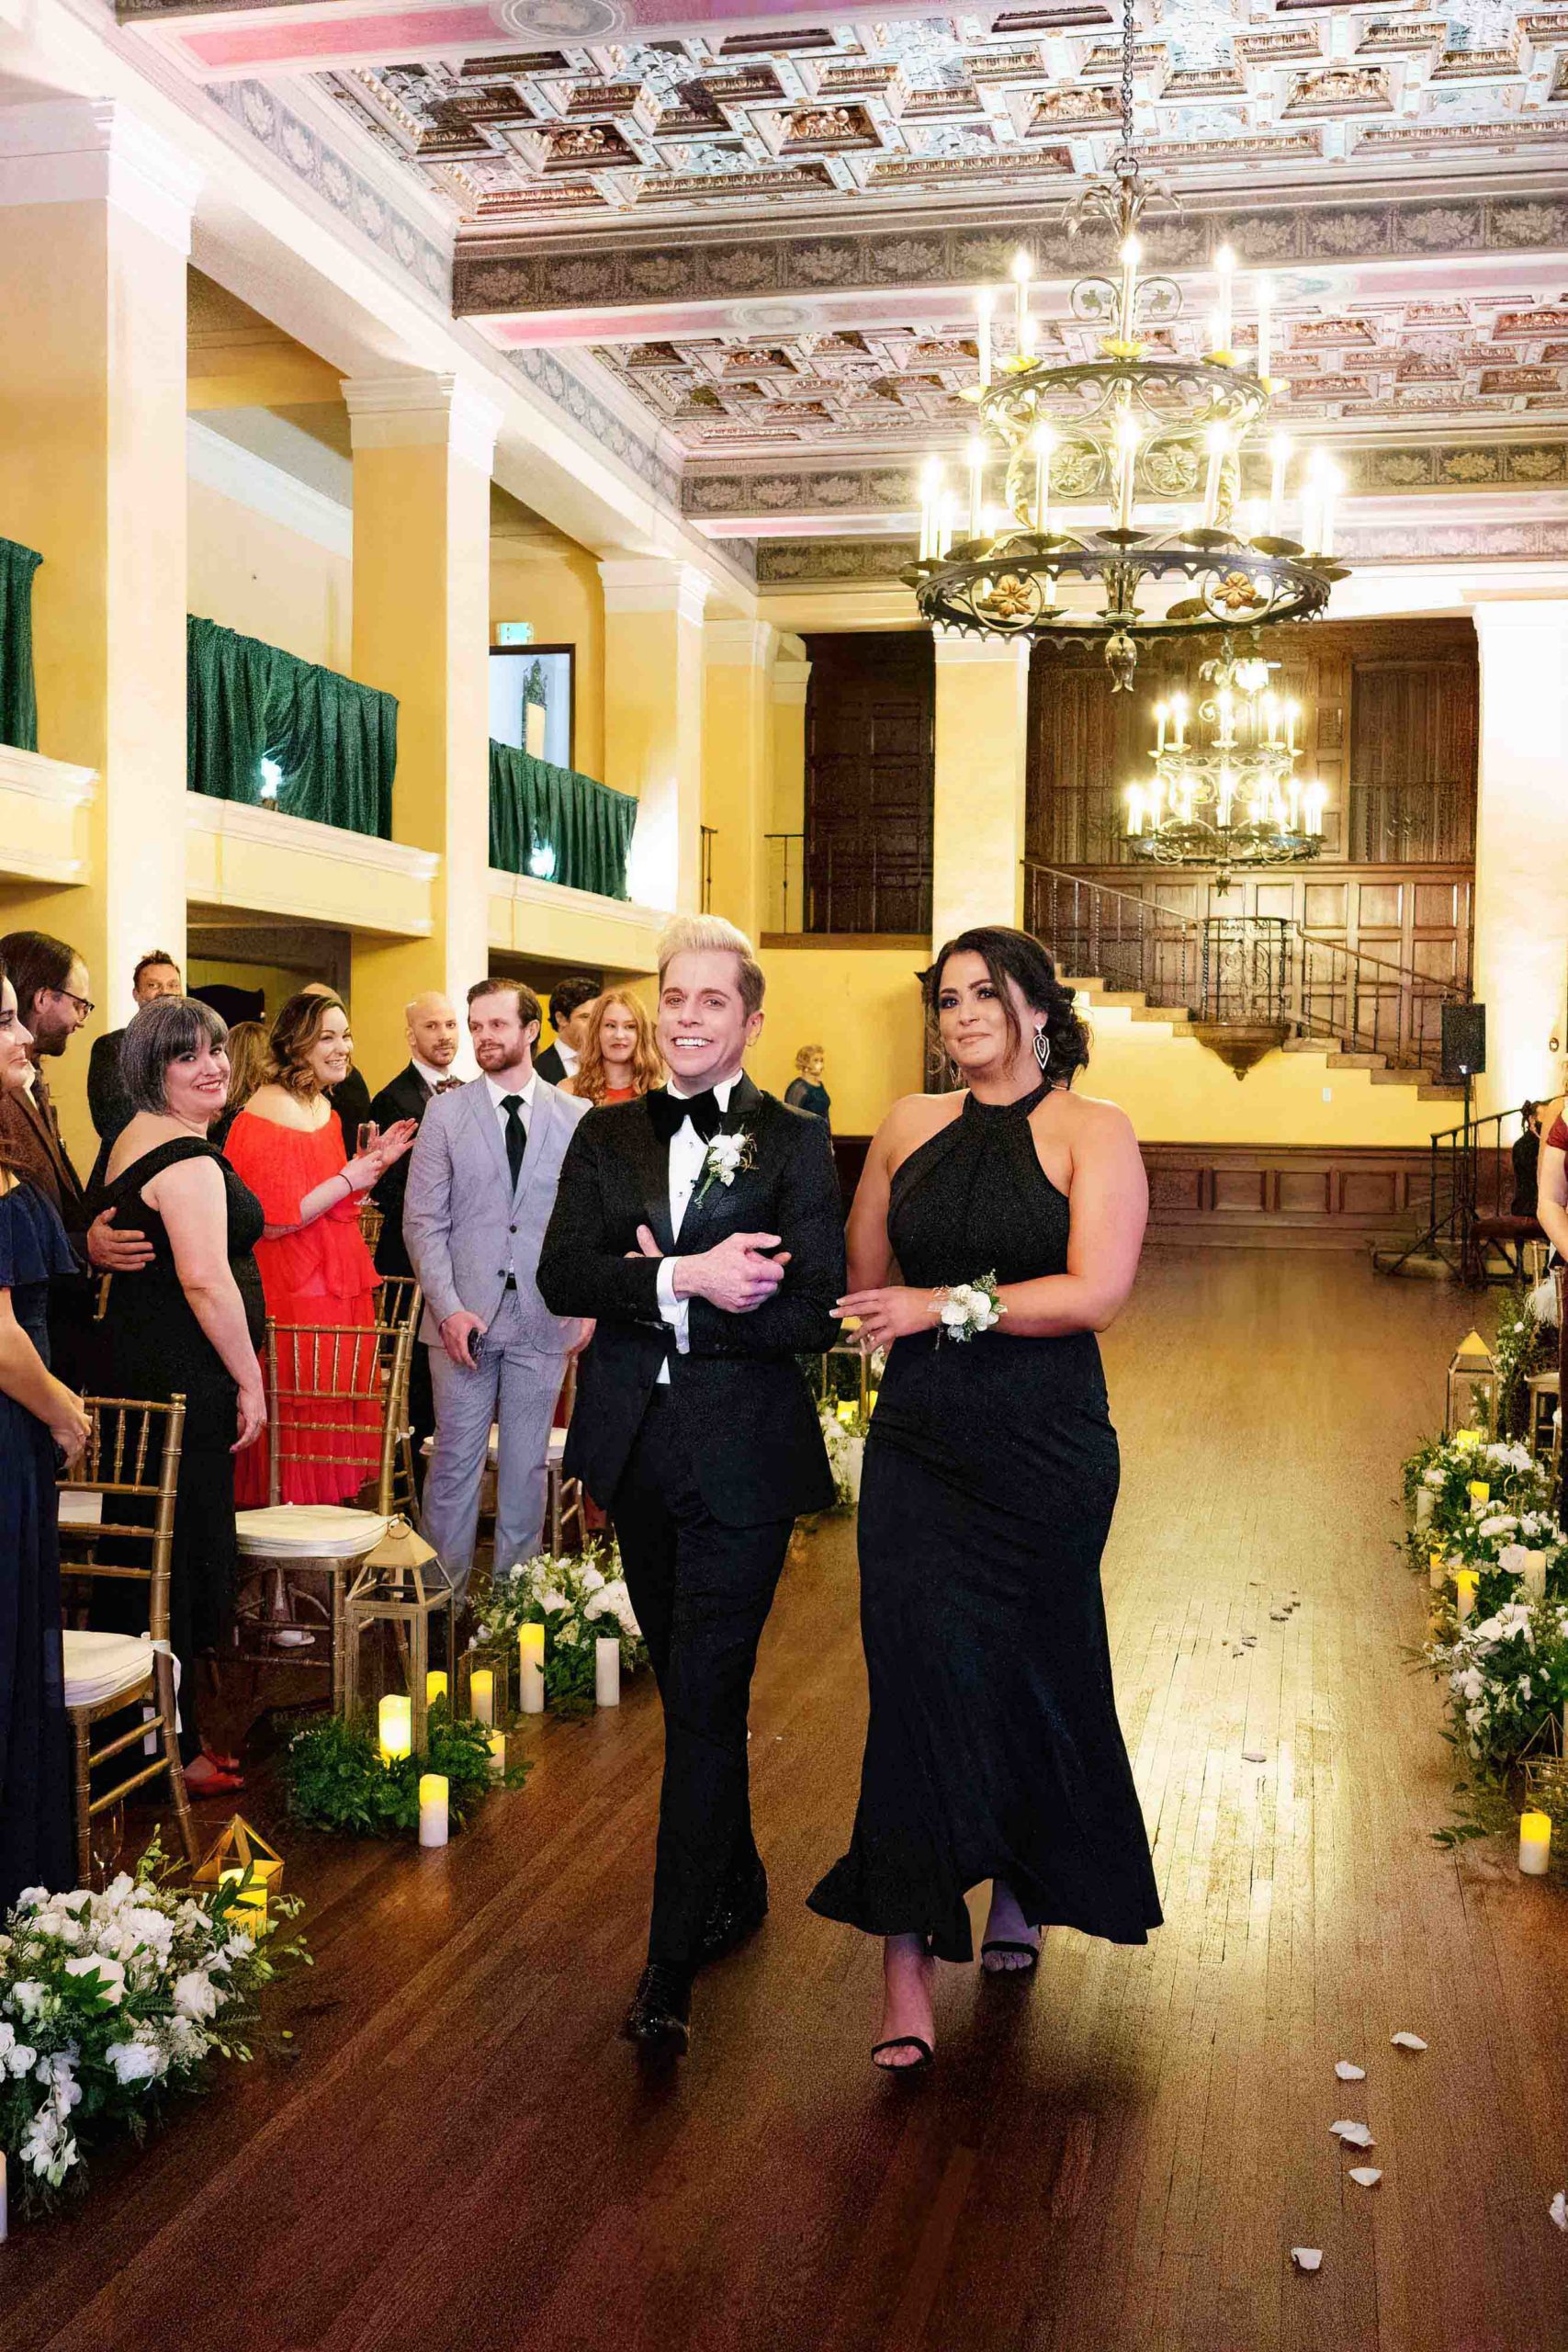 groom escorted up aisle with a woman in a dark dress while wedding guests watch